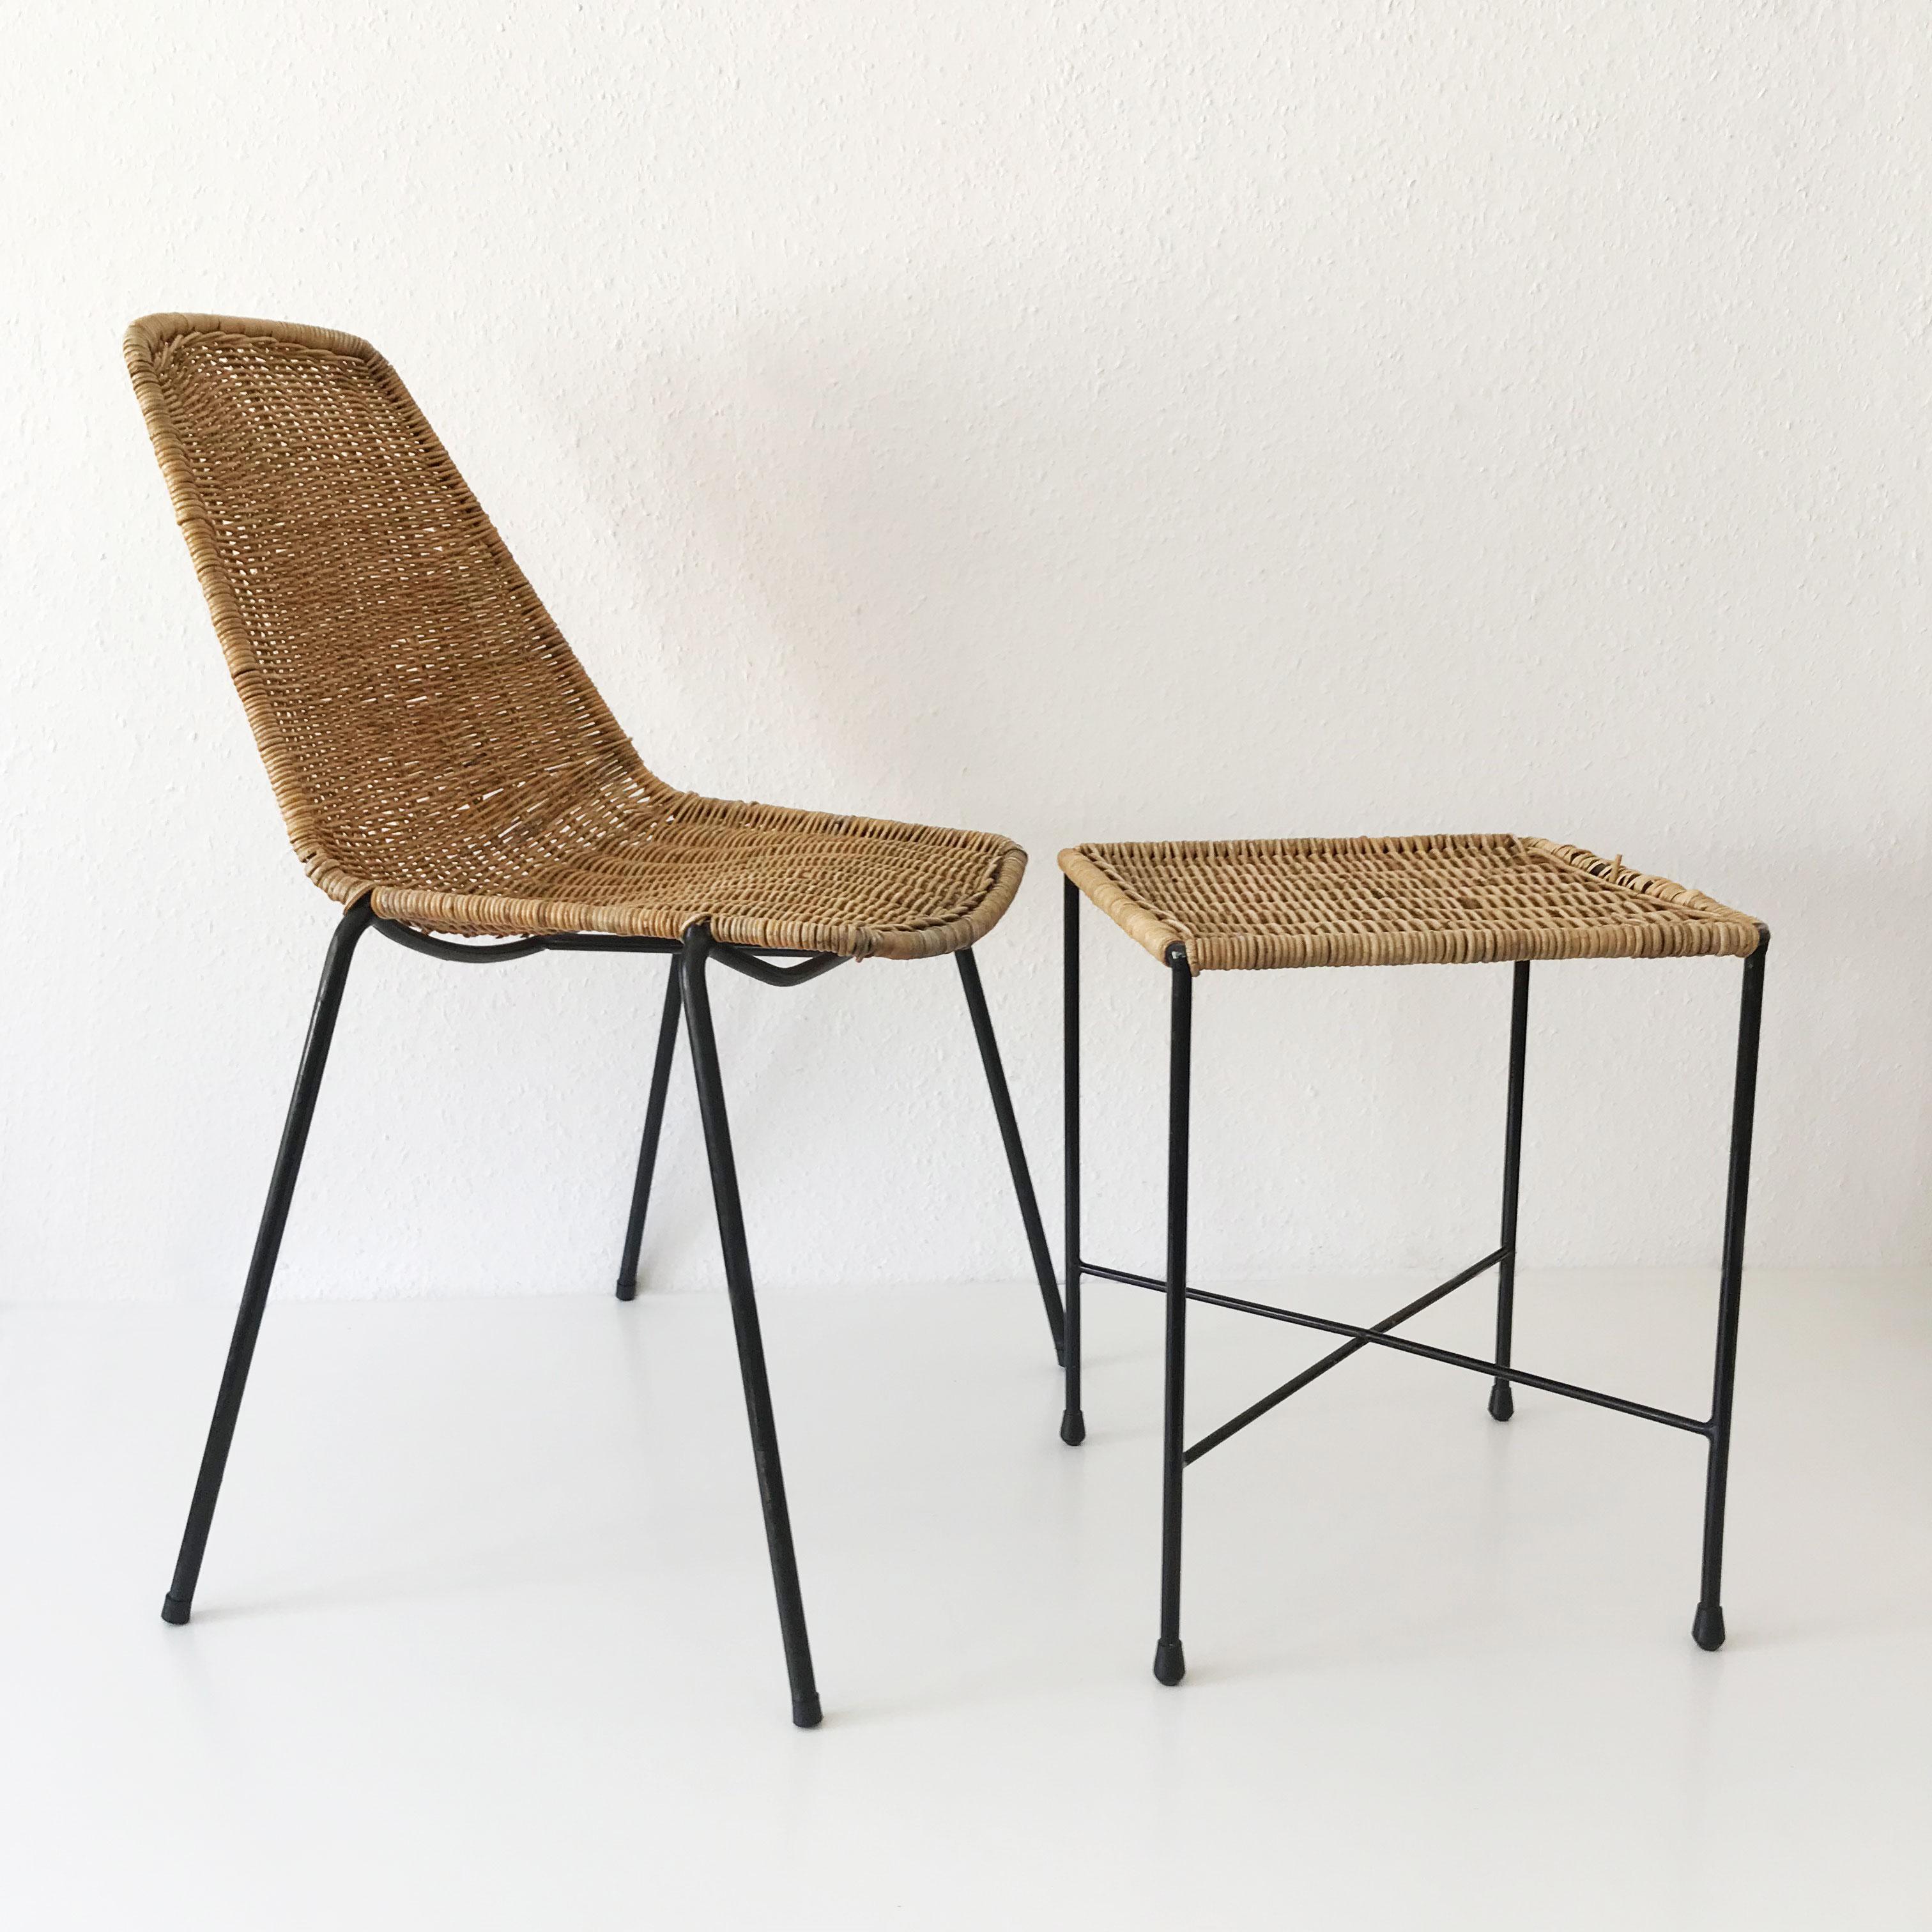 Set of Two Basket Chairs and Stool by Gian Franco Legler, 1951, Switzerland 3